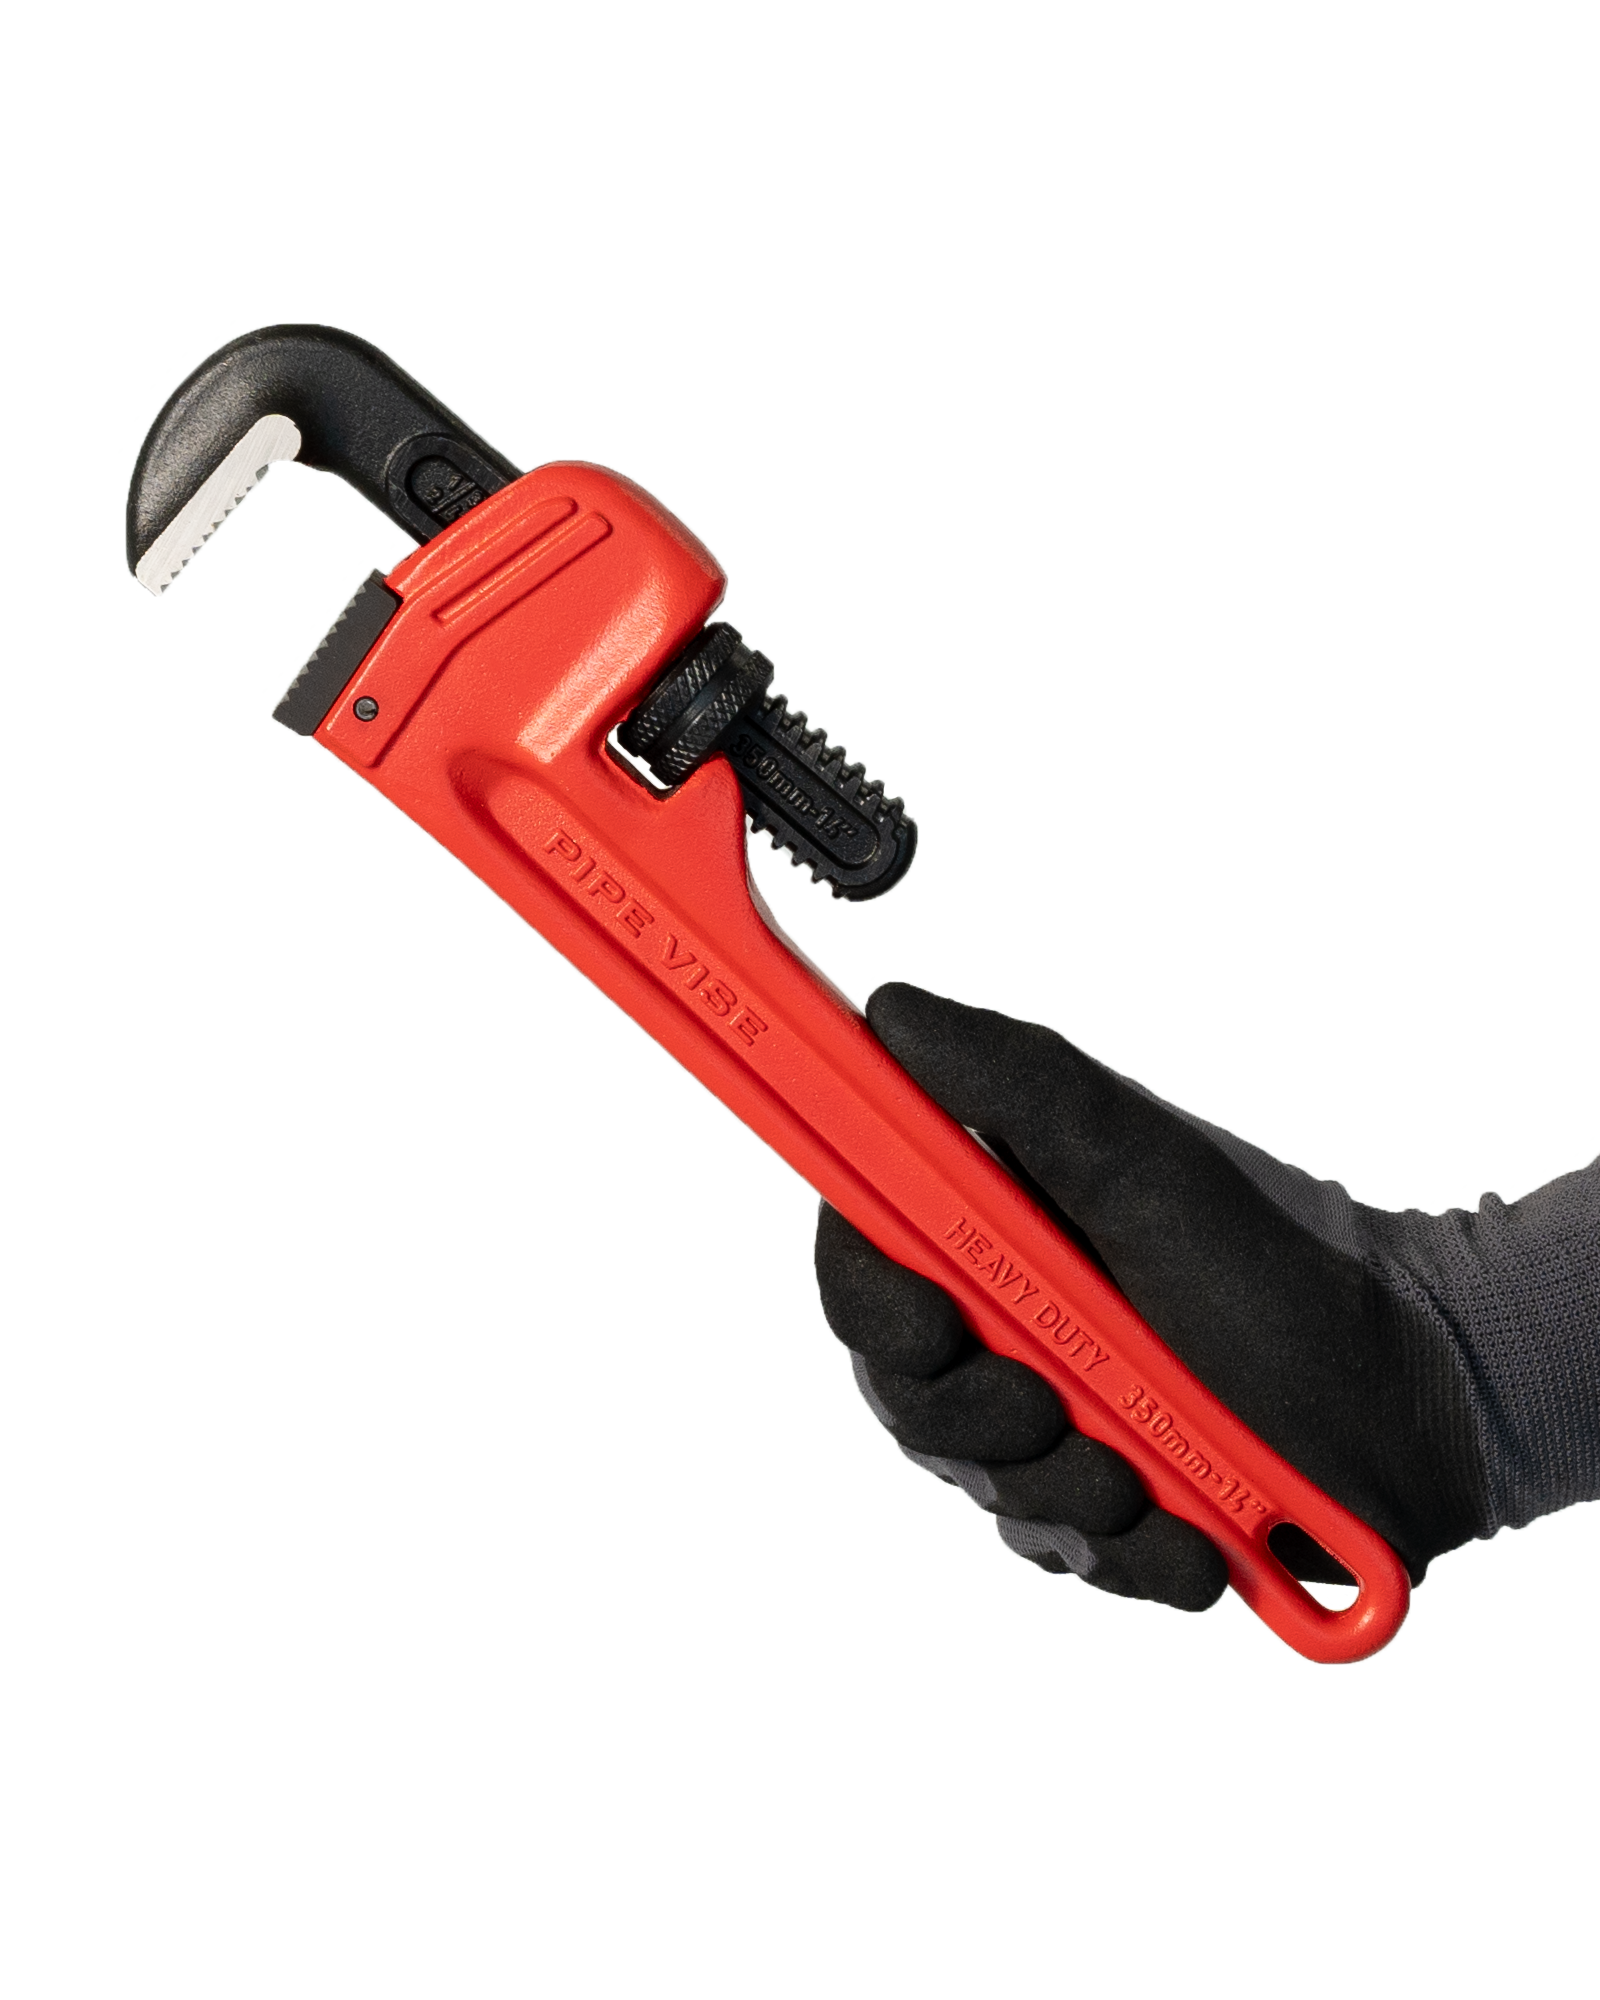 PIPE WRENCH 14